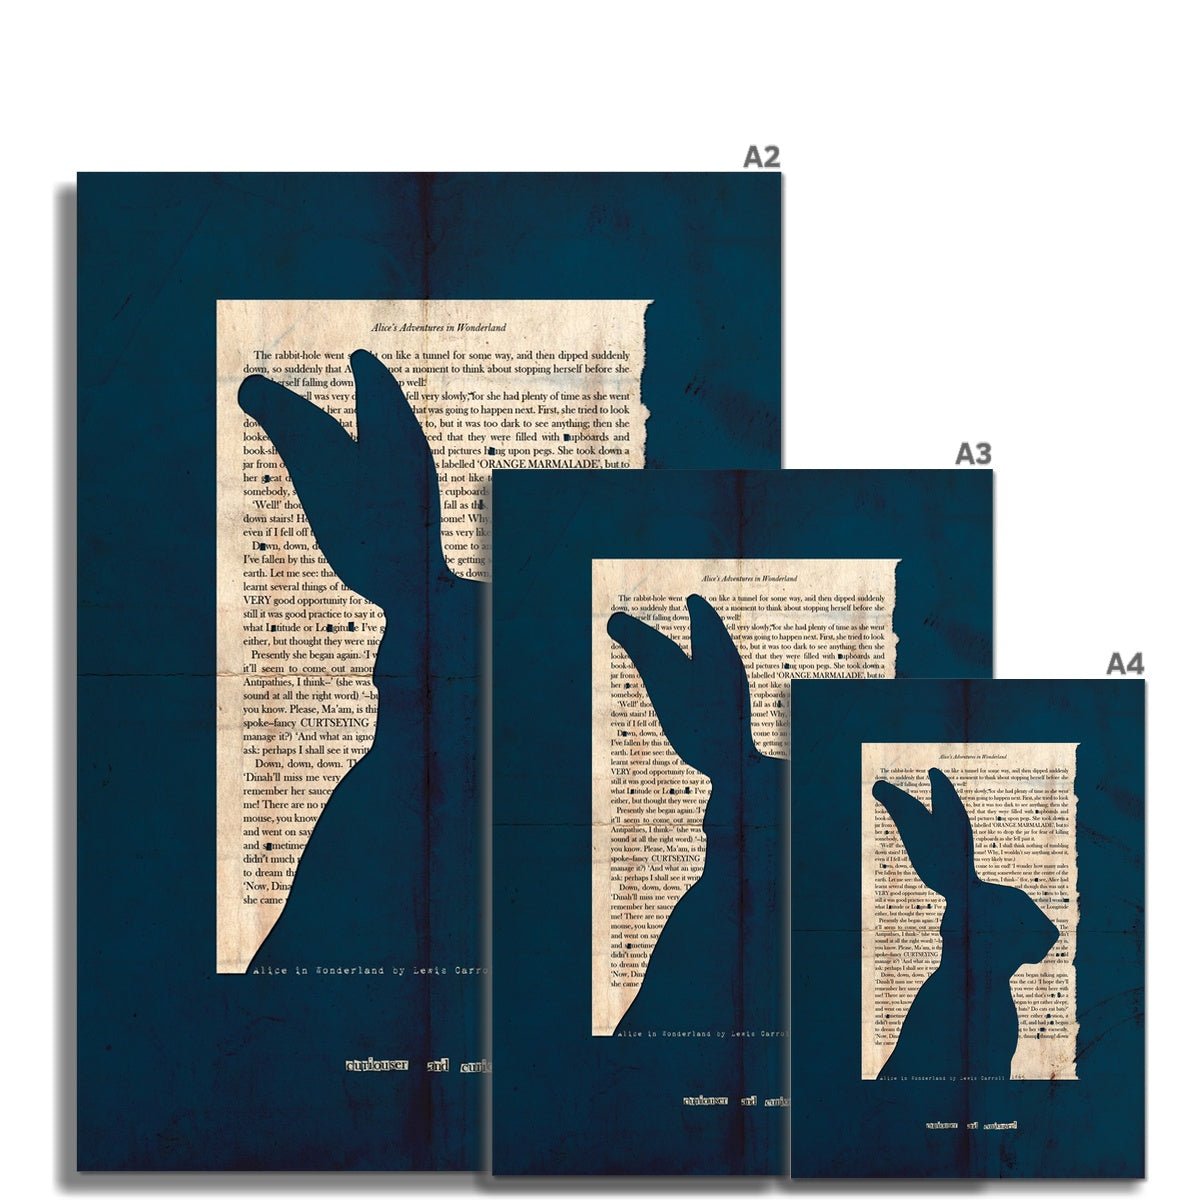 A collection of unframed fine art prints ranging from A2 to A4 depicting a page from Alice in Wonderland with the silhouette of a Hare cut out on a navy blue background with the line "curiouser and curiouser" also cut out